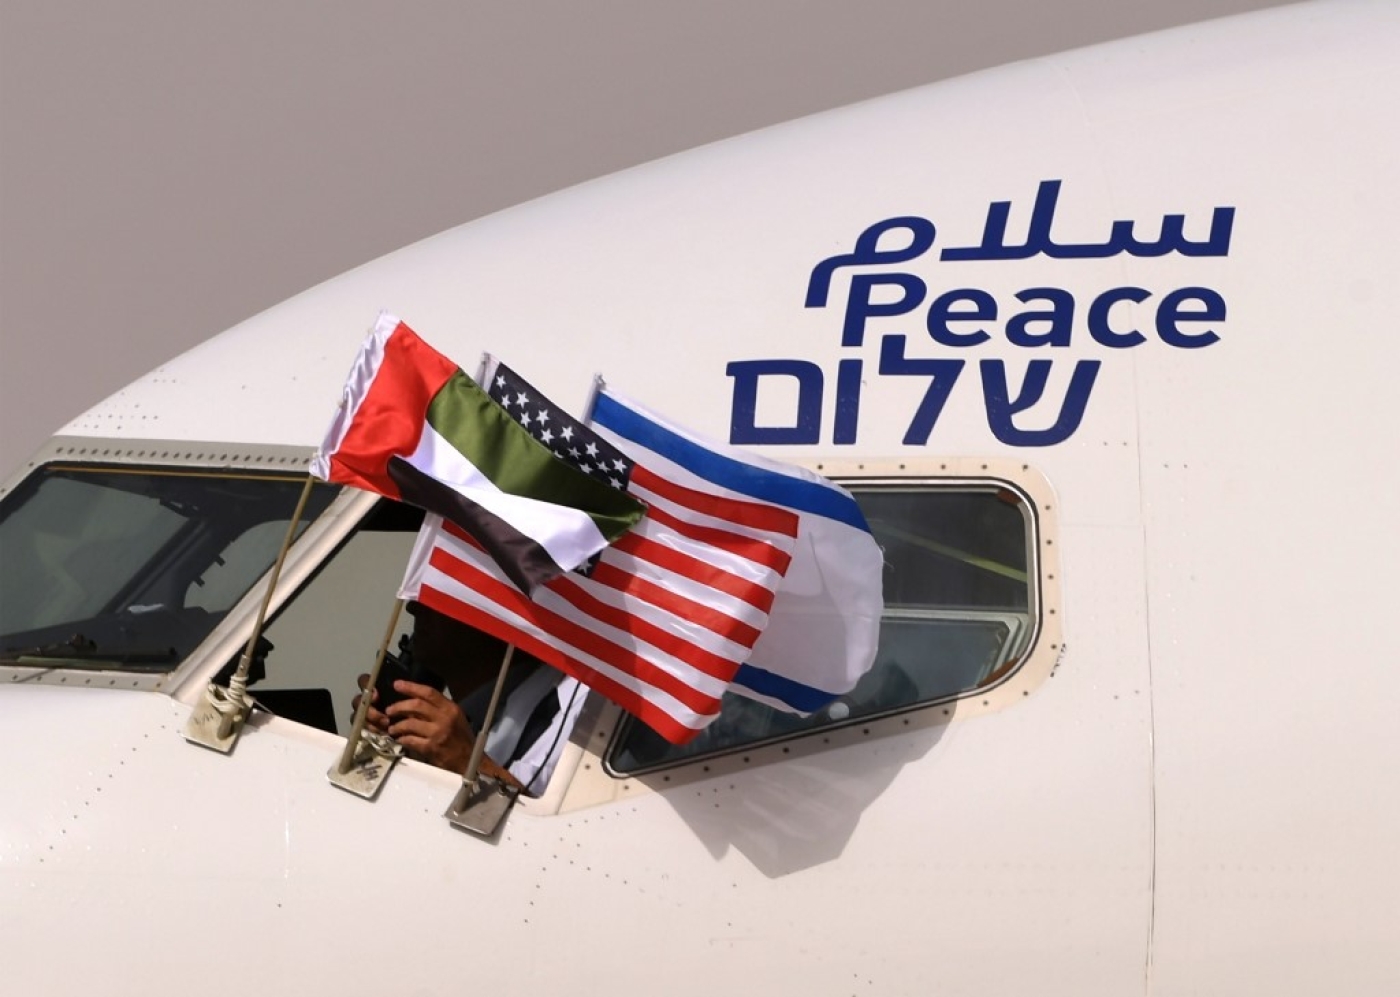 Israel's flight to the UAE: Taking the Emirates for a ride | Middle East Eye